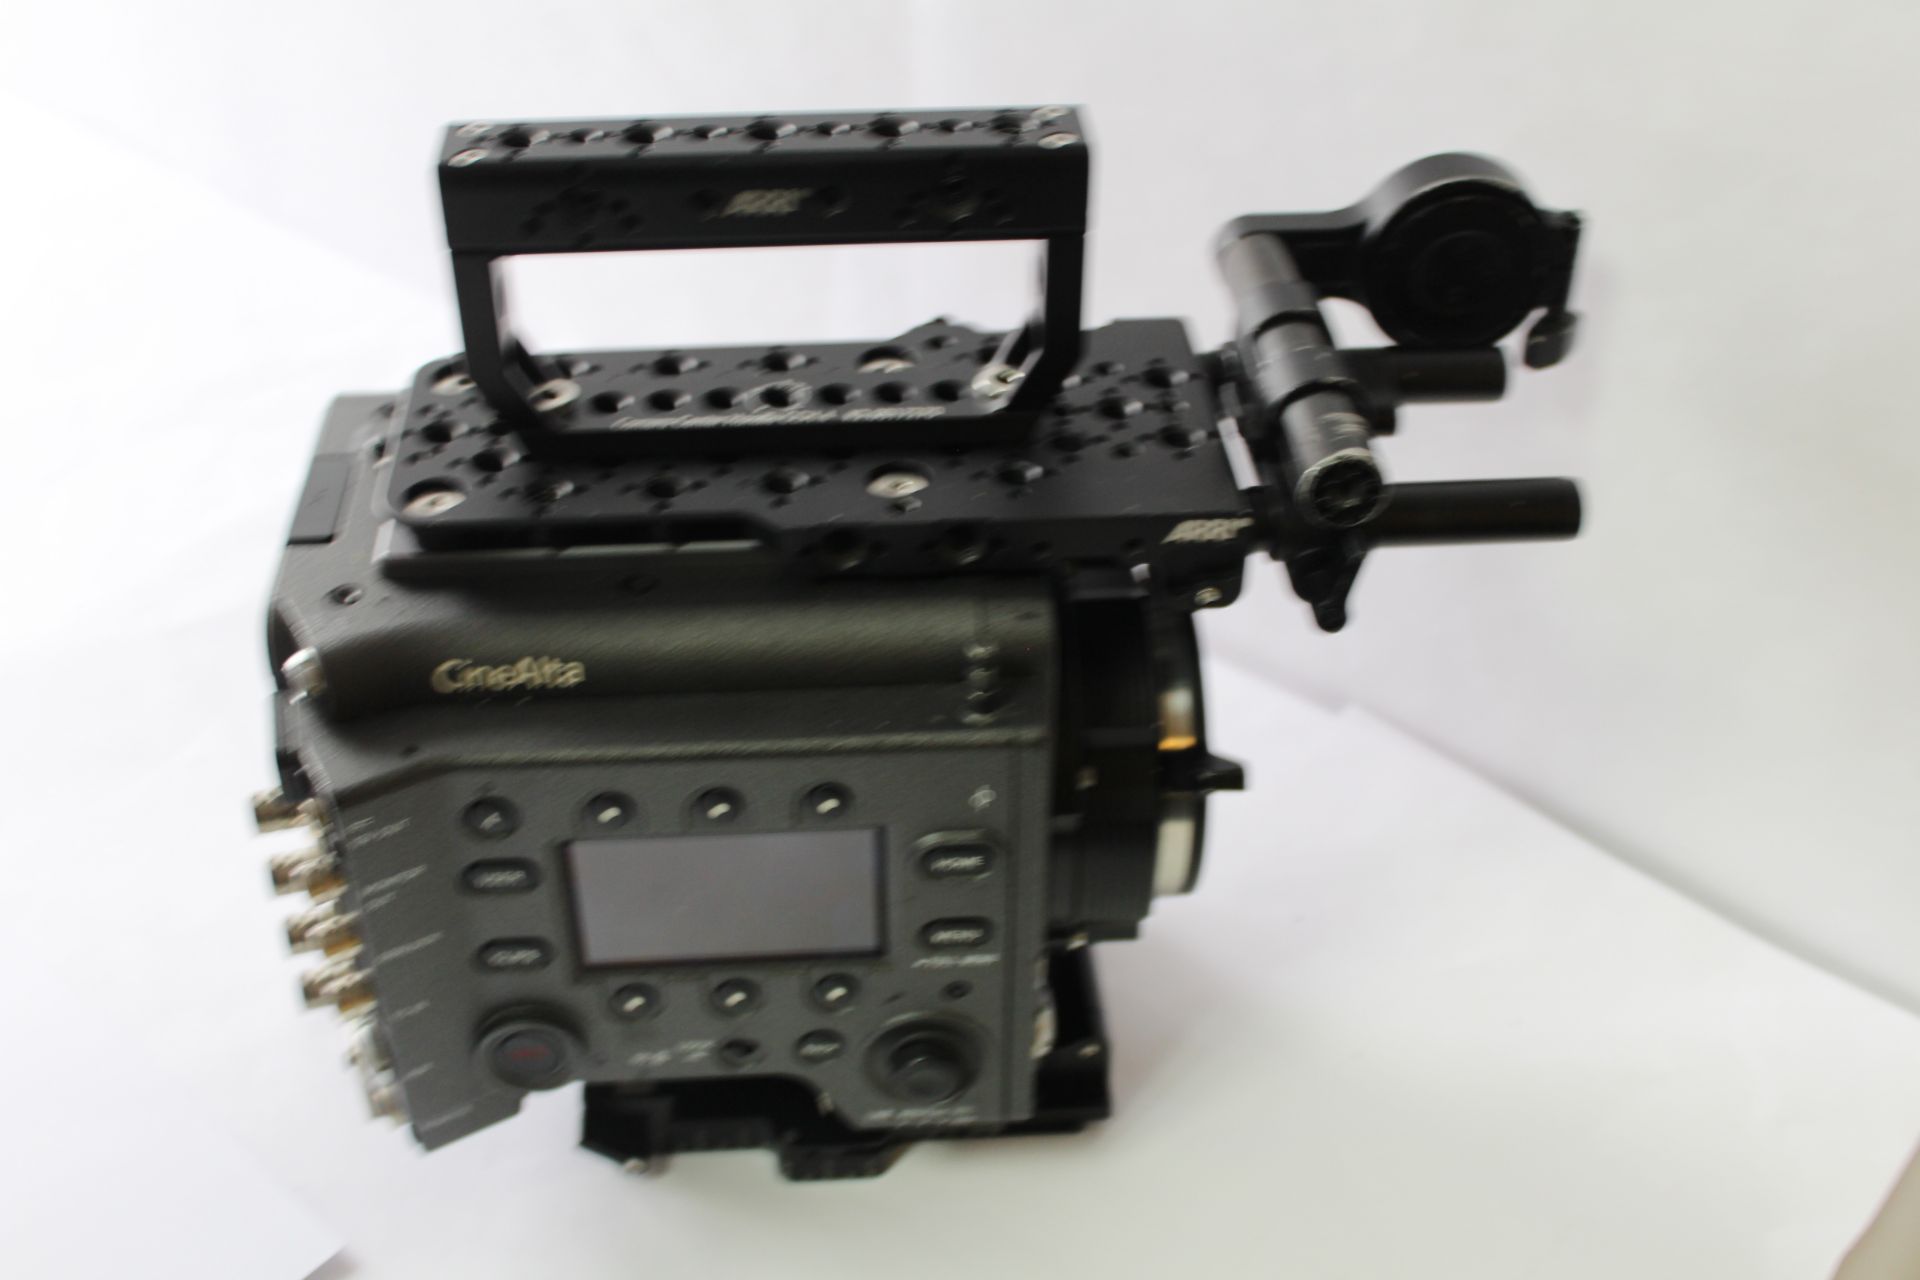 Sony Venice MPC-3610 Digtal Motion Picture Camera Body with Accessories and Flight Case - Image 3 of 3